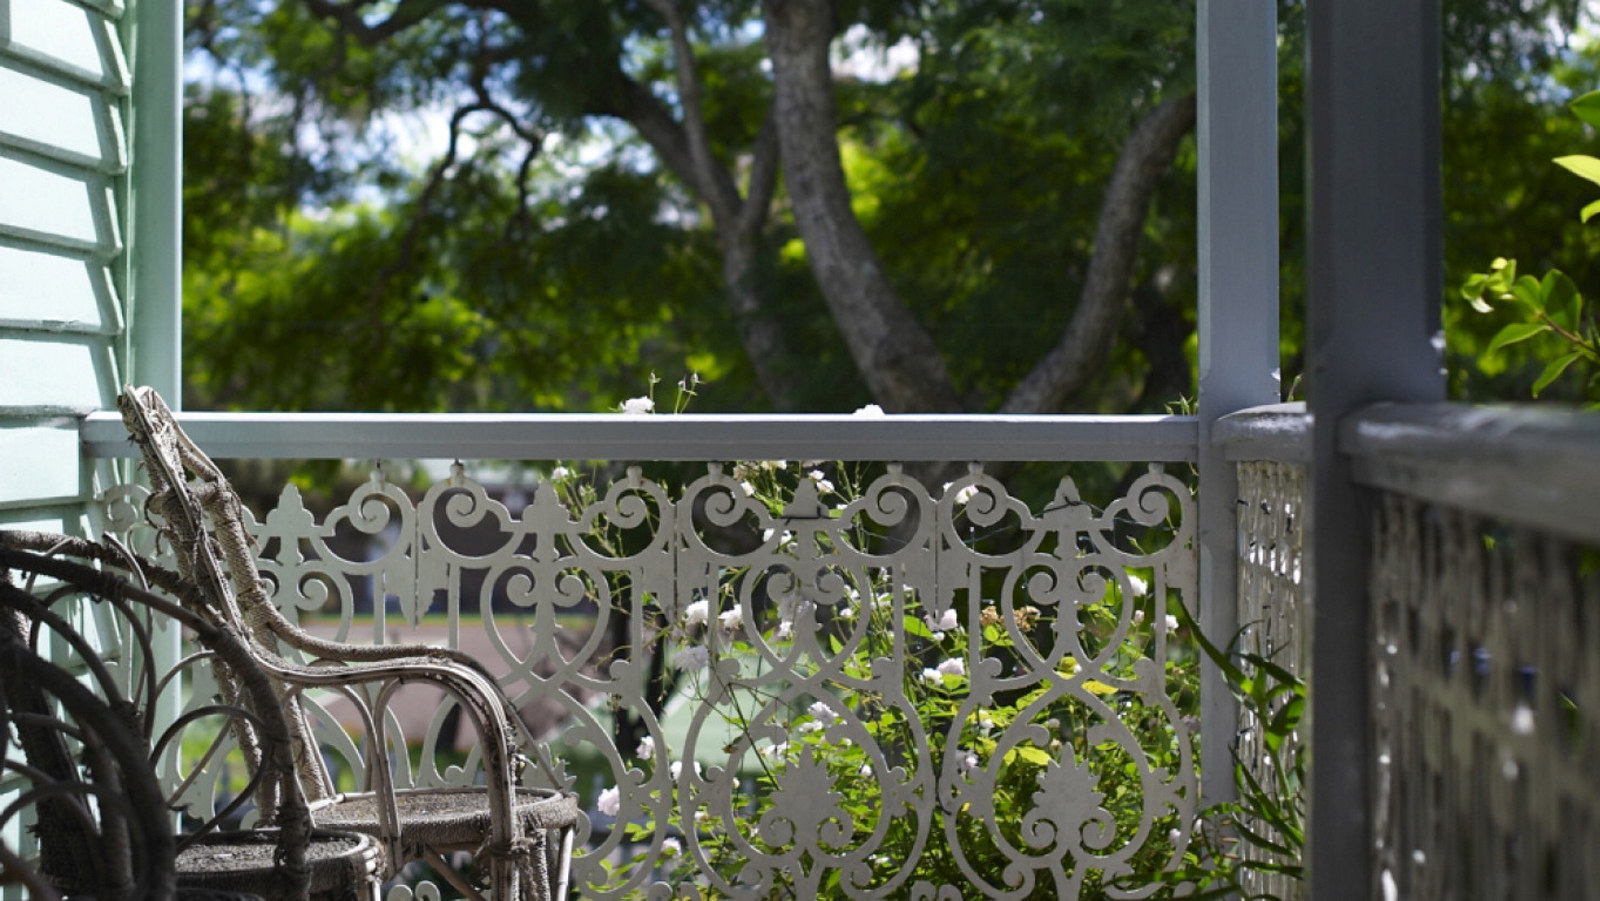 Detail of ironwork and cane chairs on sunny verandah.